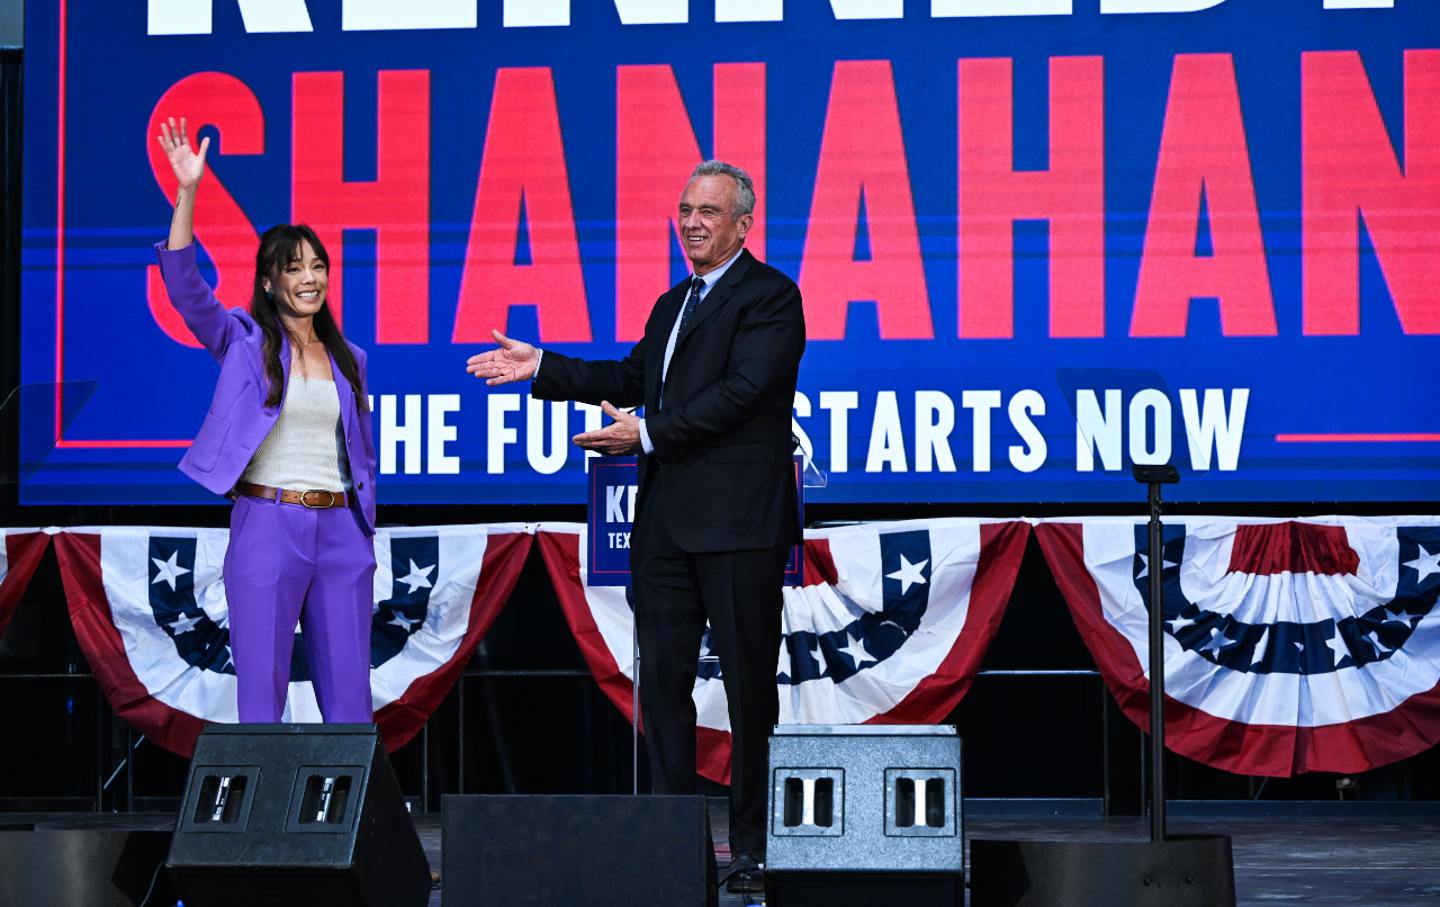 Robert F. Kennedy Jr. introduces California attorney Nicole Shanahan as his running mate for vice president during an event in Oakland, Calif.,on March 26, 2024.